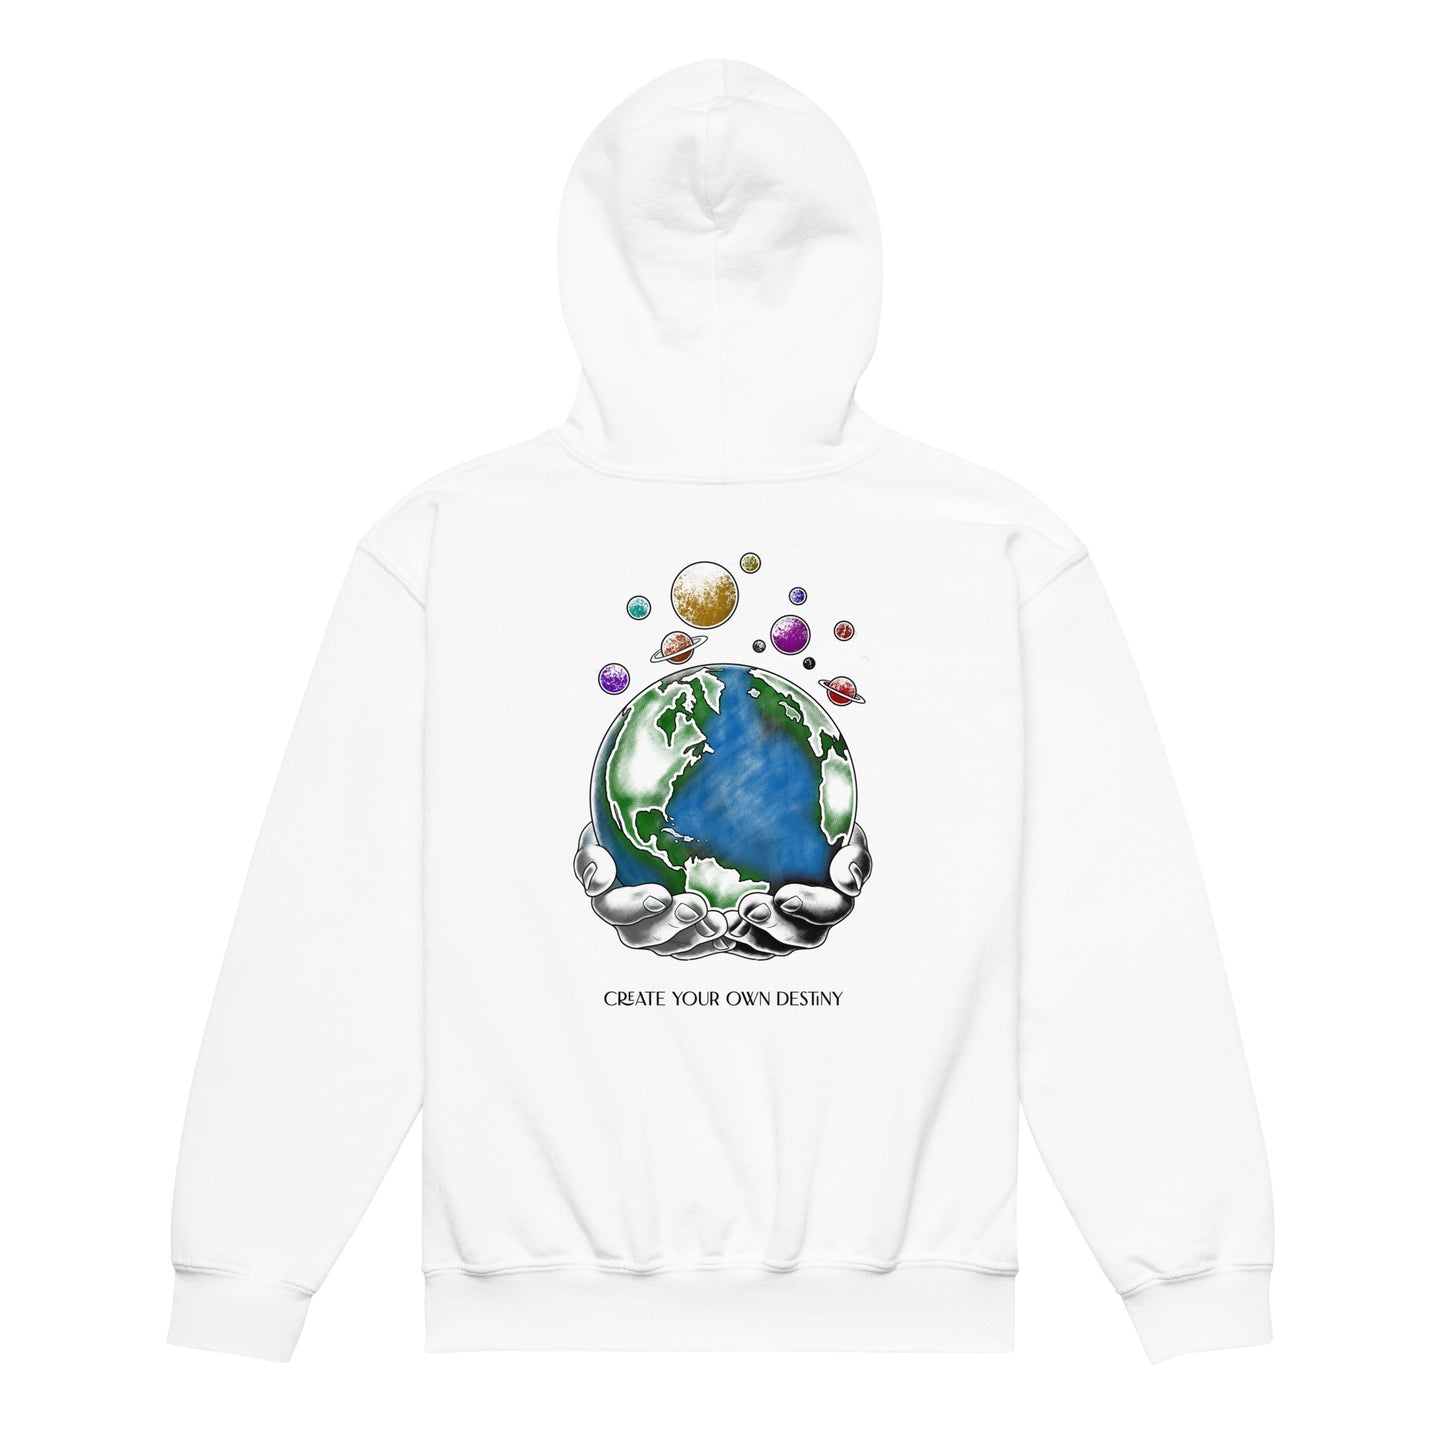 “CREATE YOUR OWN DESTINY” kids hoodie